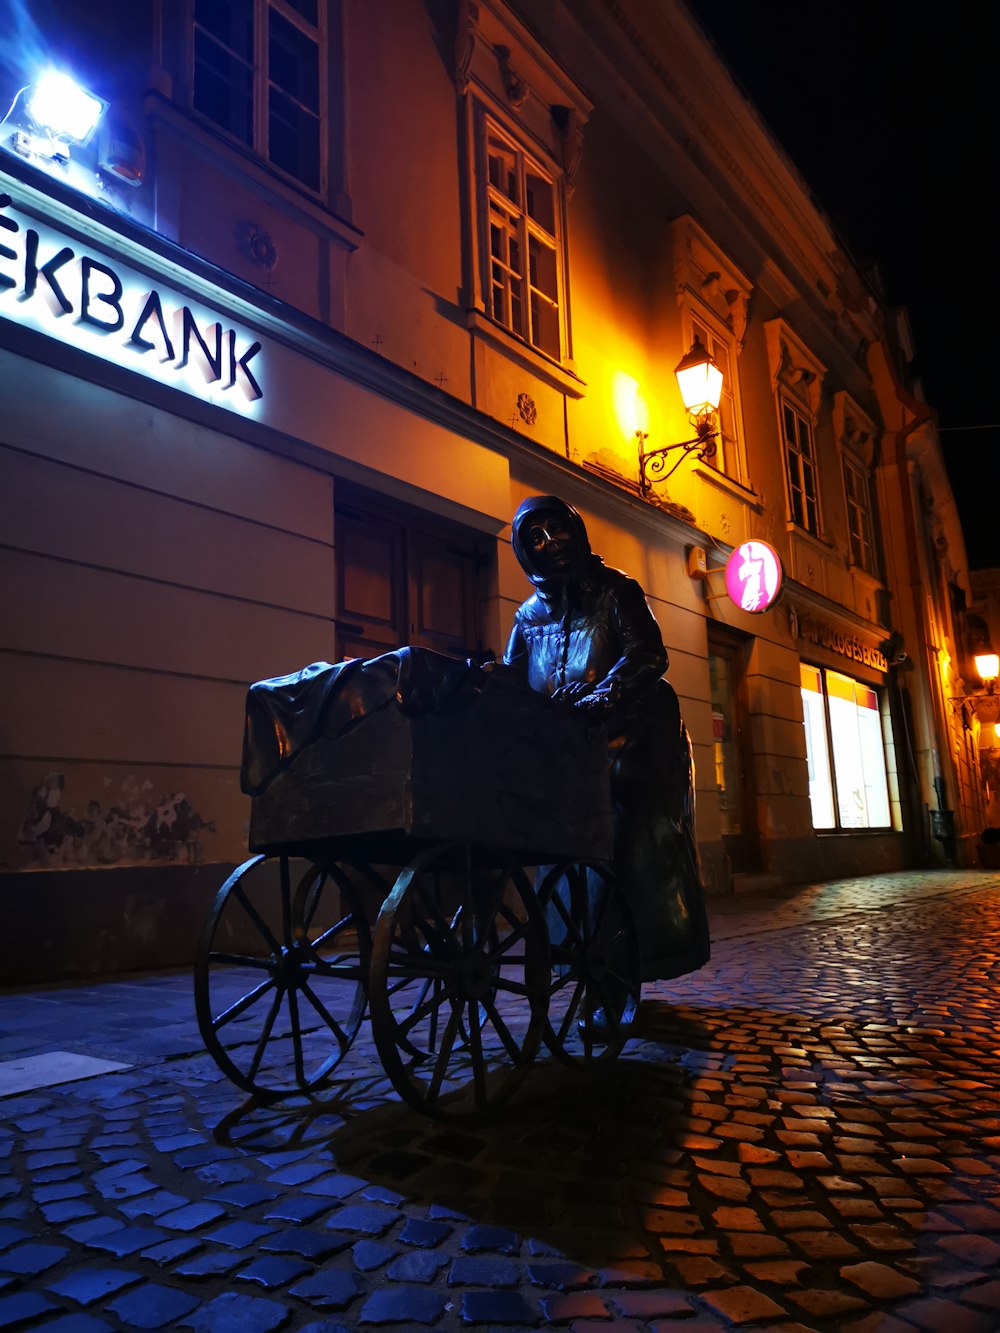 a statue of a man sitting on a horse drawn carriage in front of a bank